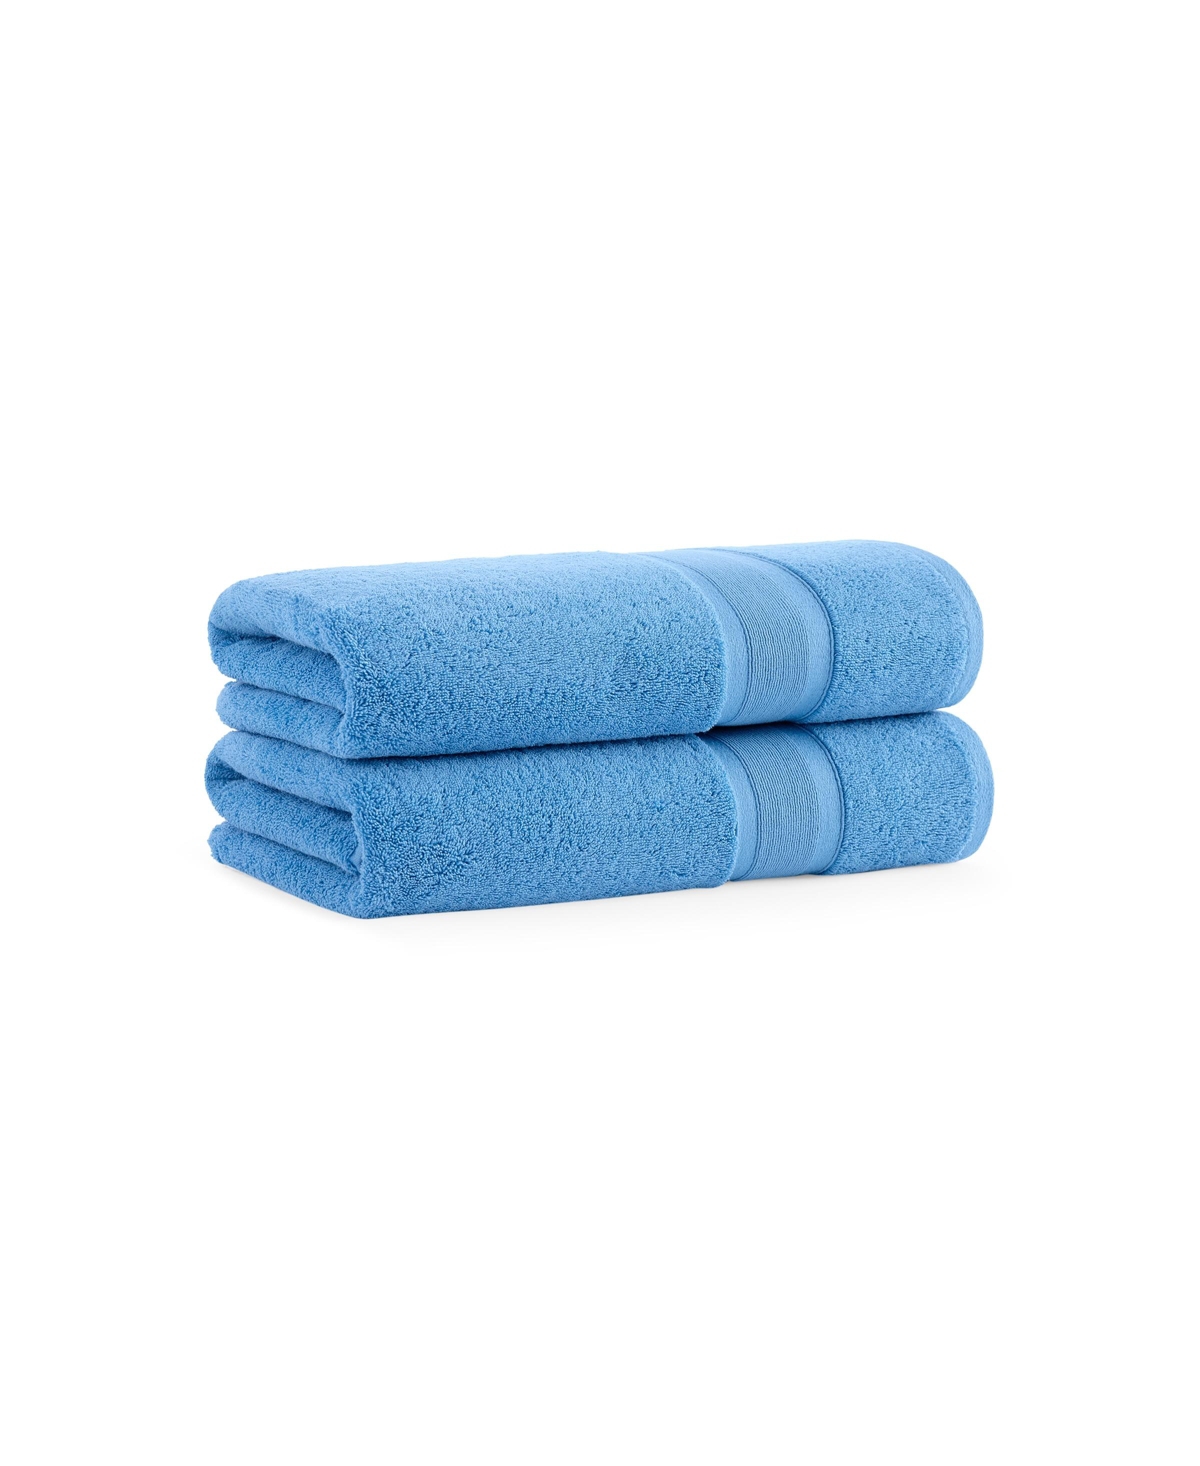 Aston And Arden Aegean Eco-friendly Recycled Turkish Bath Towels (2 Pack), 30x60, 600 Gsm, Solid Color With Weft Wov In Blue